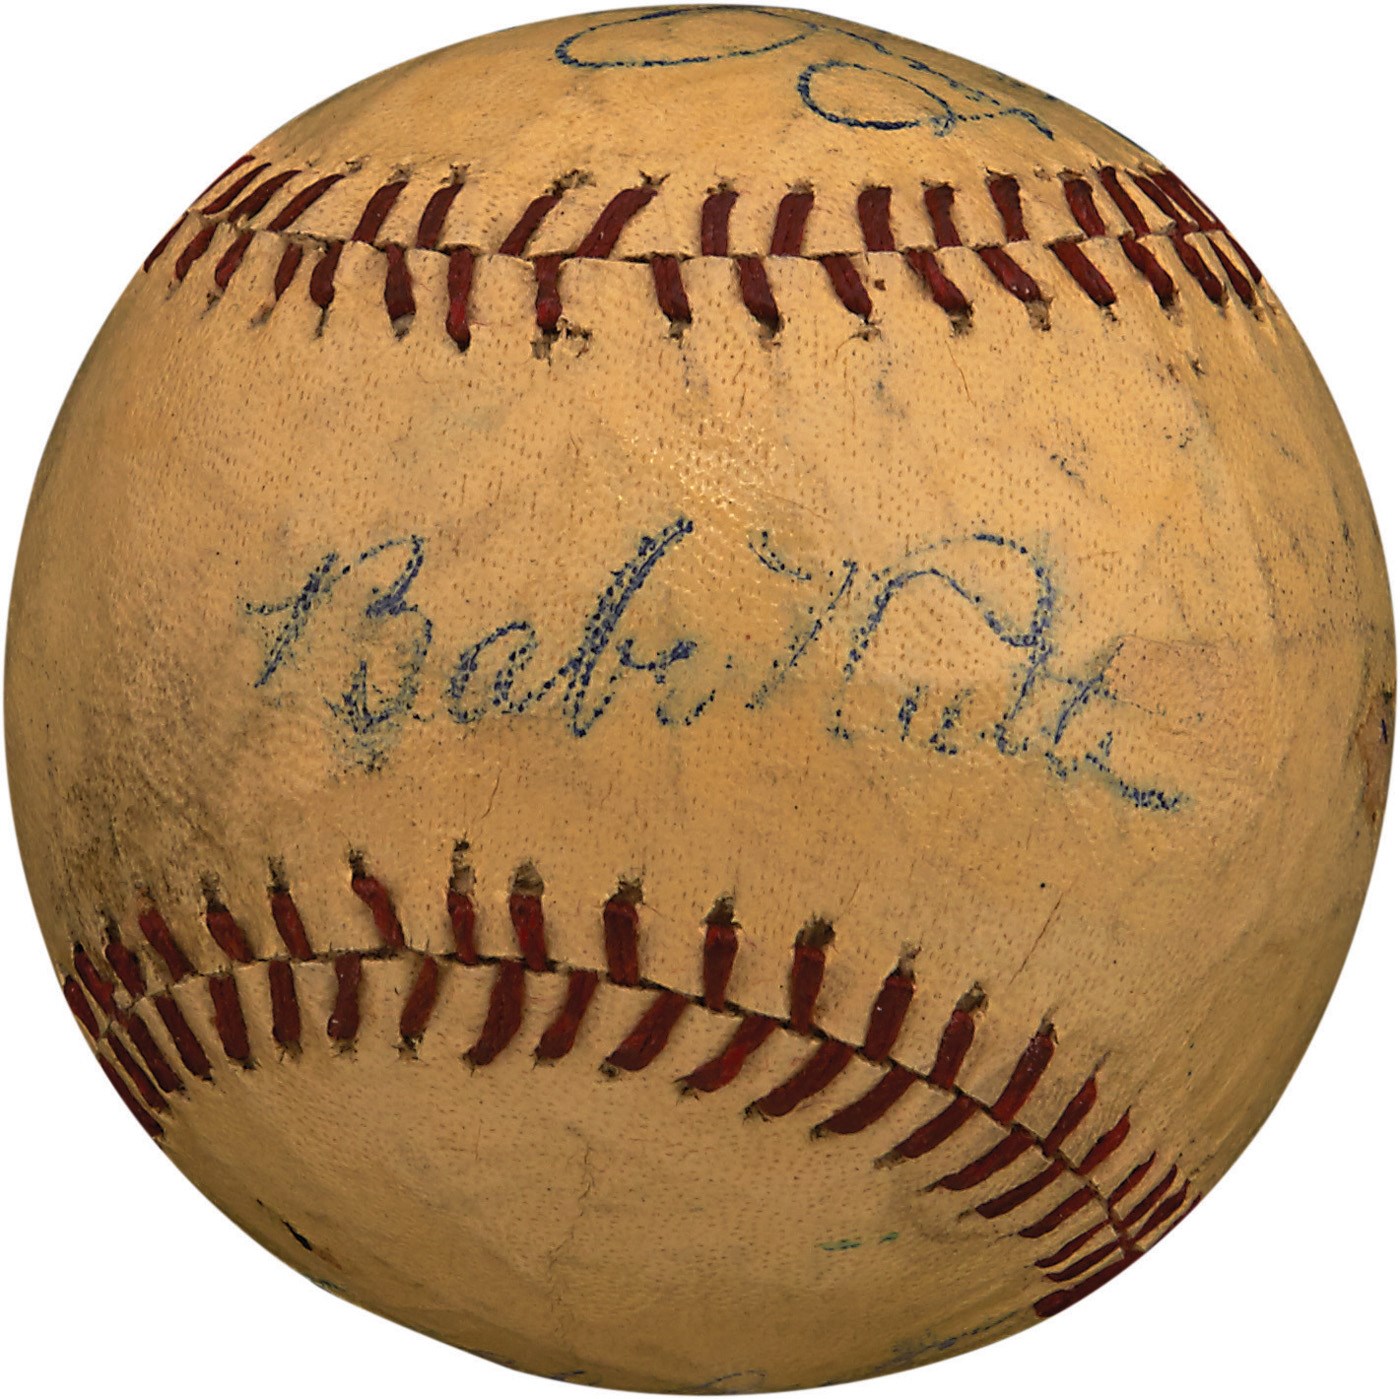 1928-29 New York Yankees Team-Signed Baseball with Proof of Signing (PSA)